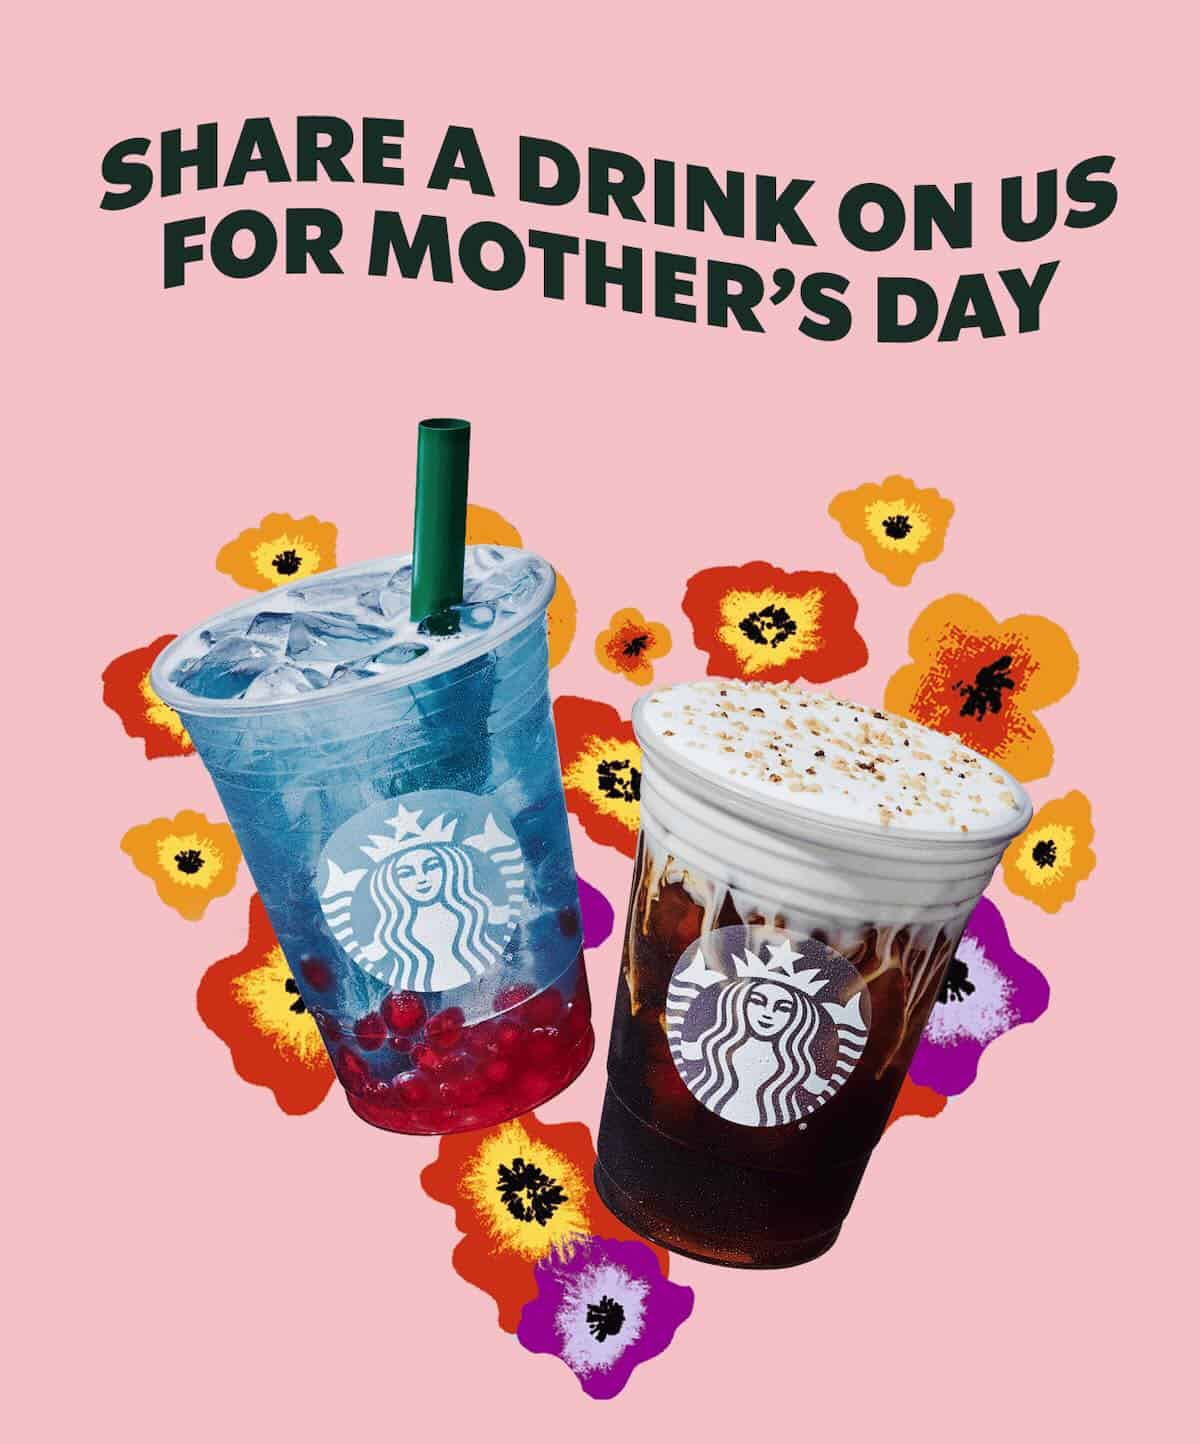 Buy one drink, get one free at Starbucks on Mother's Day Triangle on